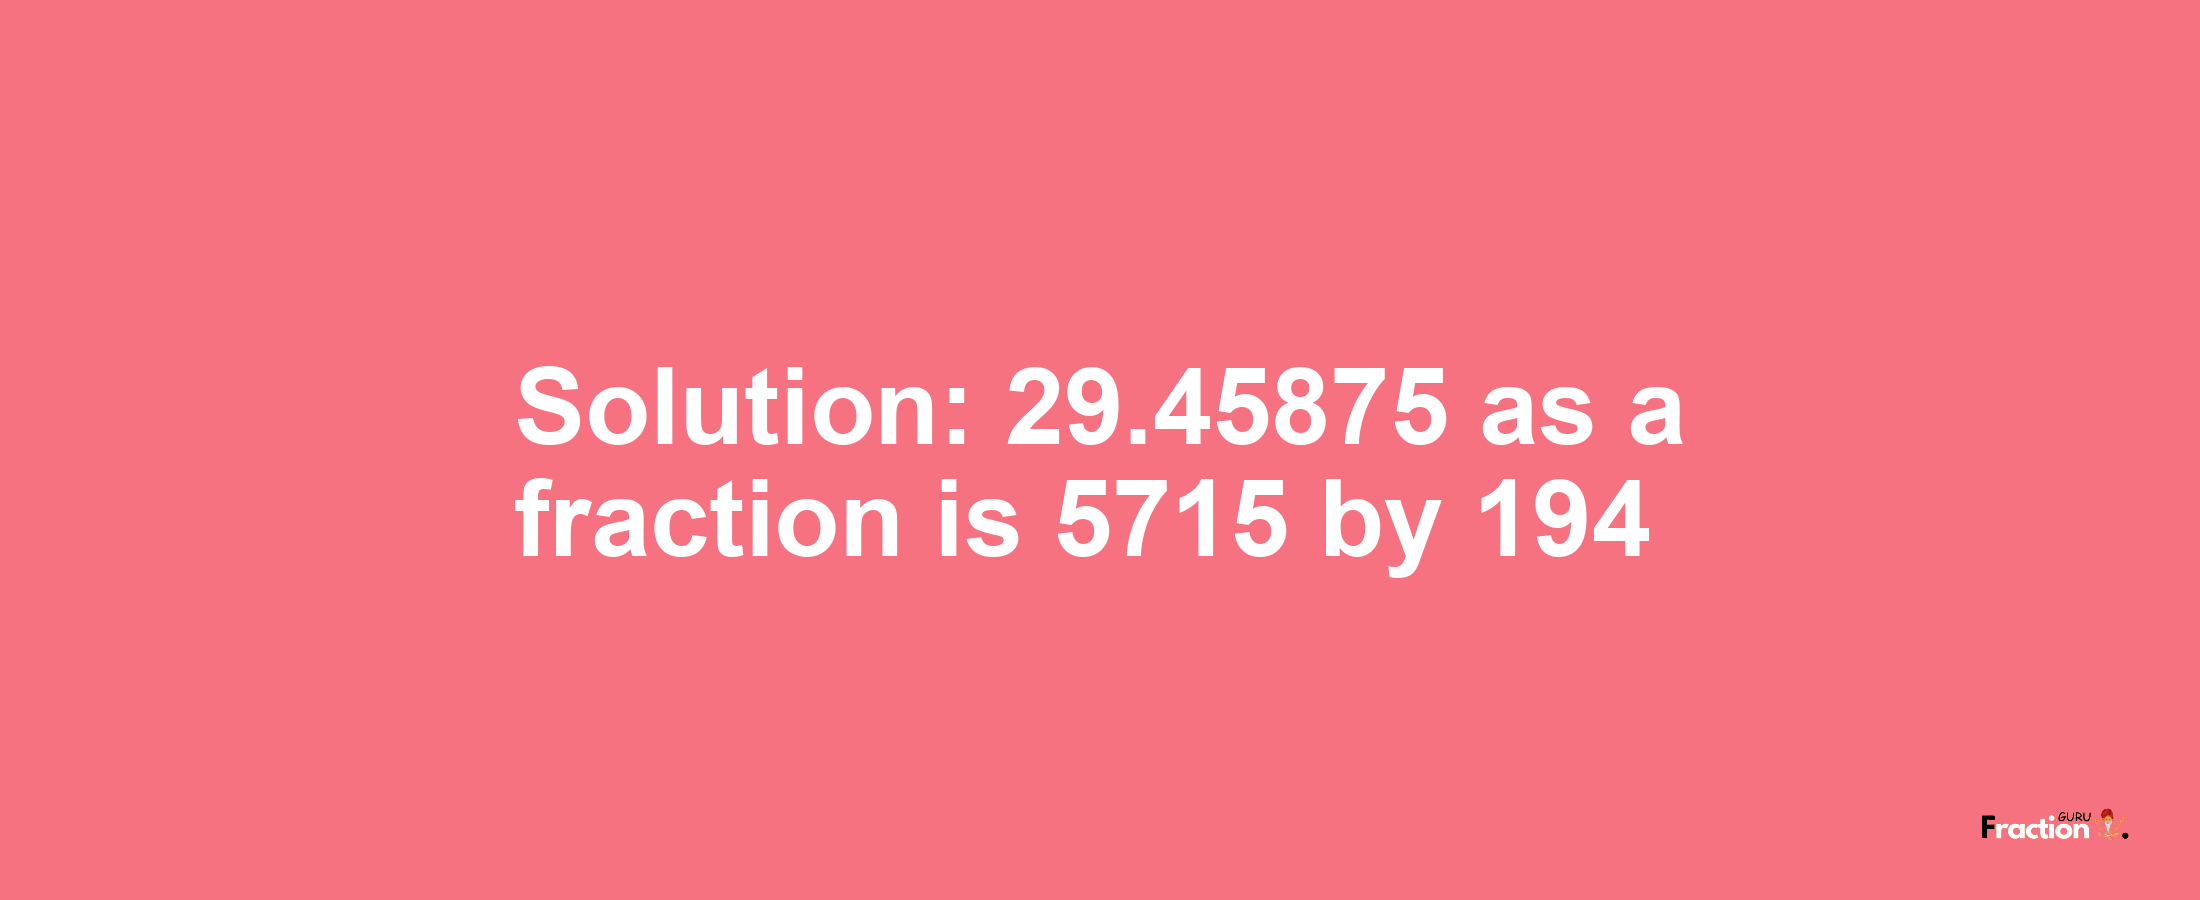 Solution:29.45875 as a fraction is 5715/194